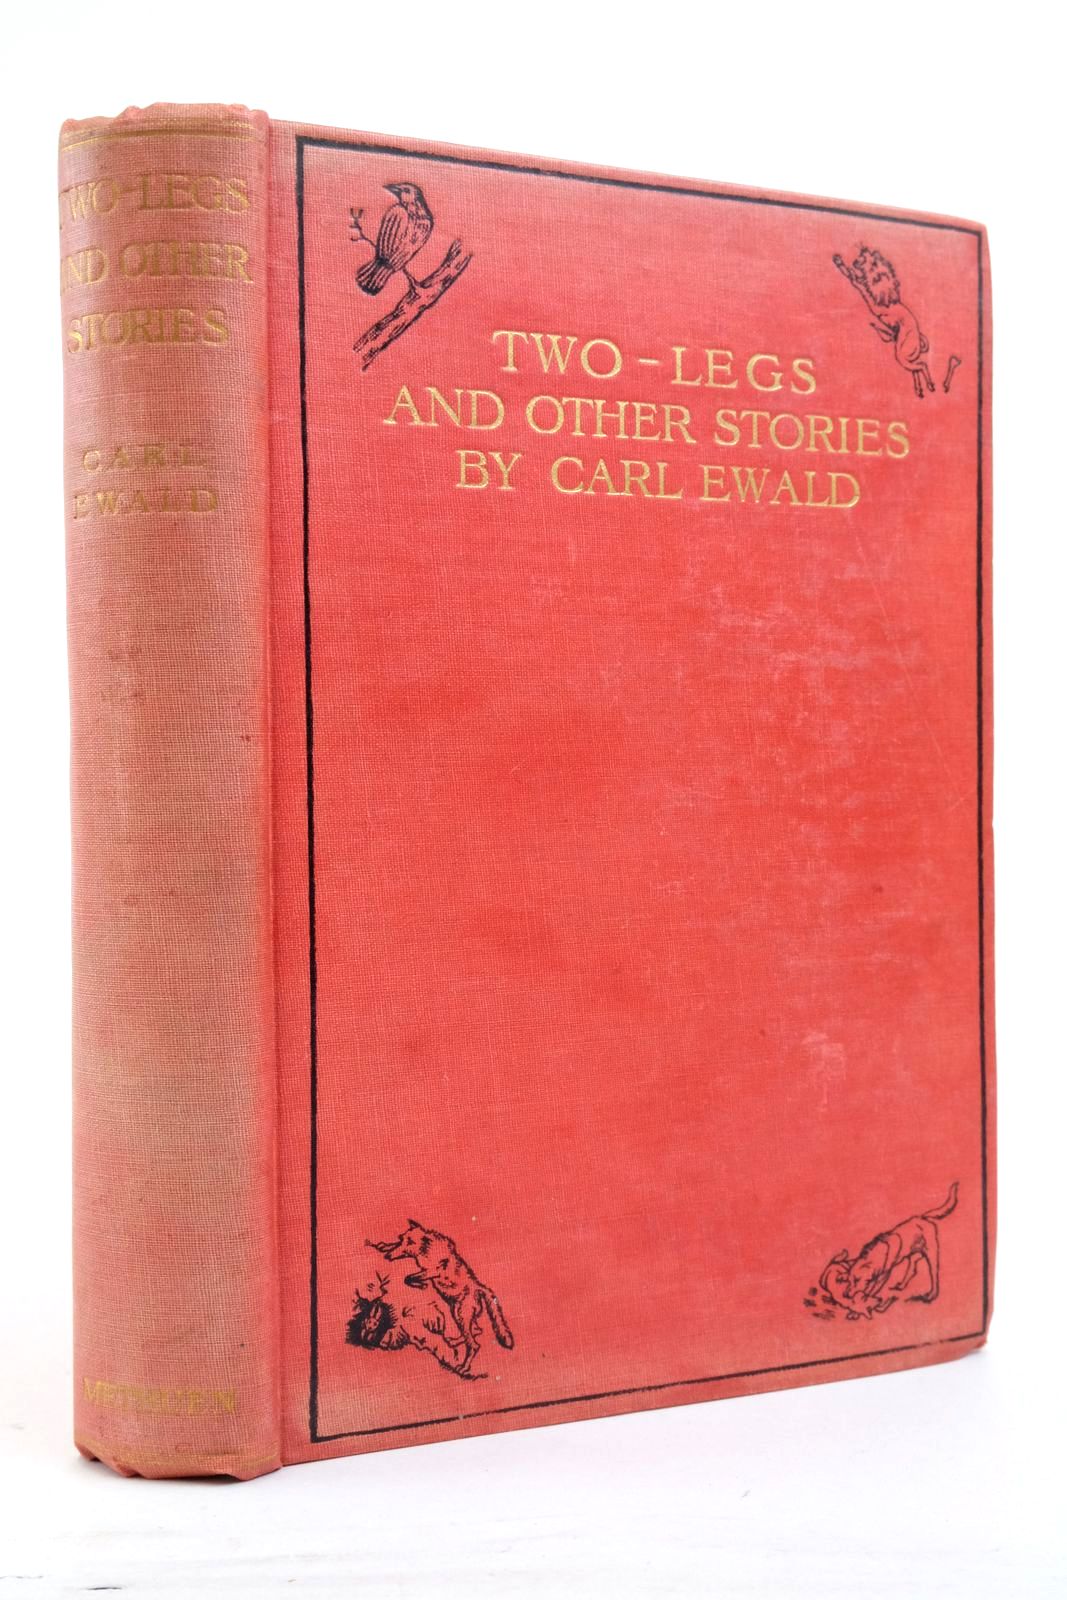 Photo of TWO-LEGS AND OTHER STORIES written by Ewald, Carl illustrated by Guest, Augusta published by Methuen & Co. (STOCK CODE: 2137473)  for sale by Stella & Rose's Books